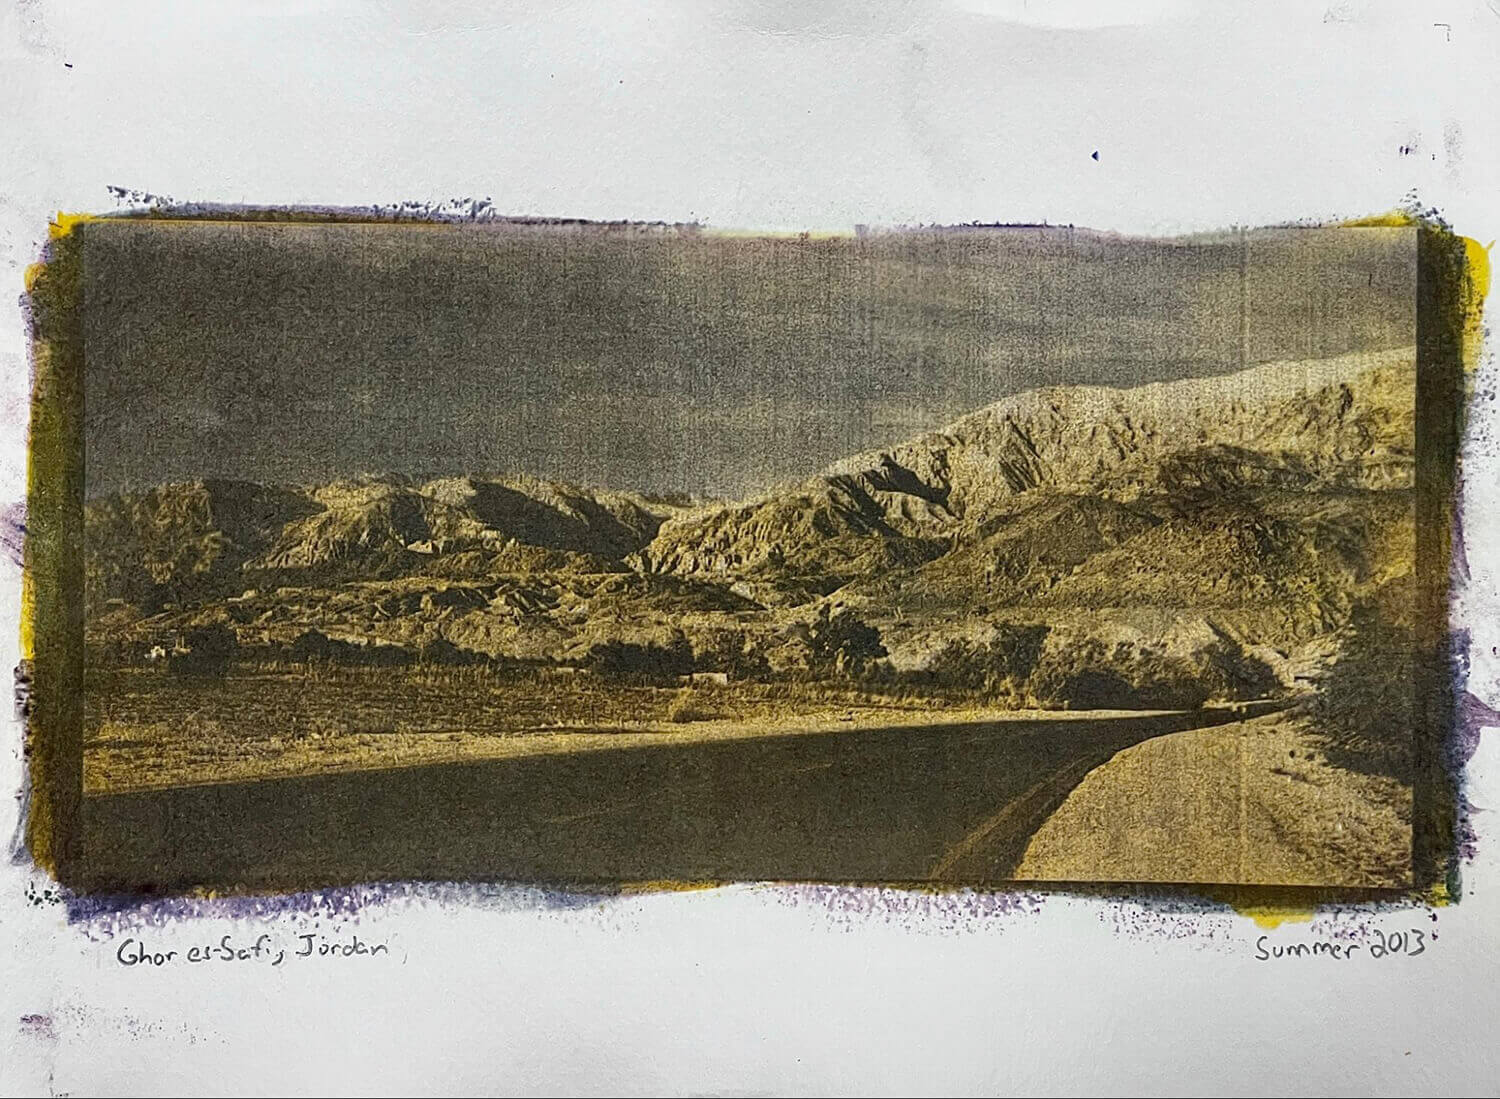 A CMYK print from a colorized black and white 6x9 image taken near the town of Ghor es-Safi, Jordan in 2013. 